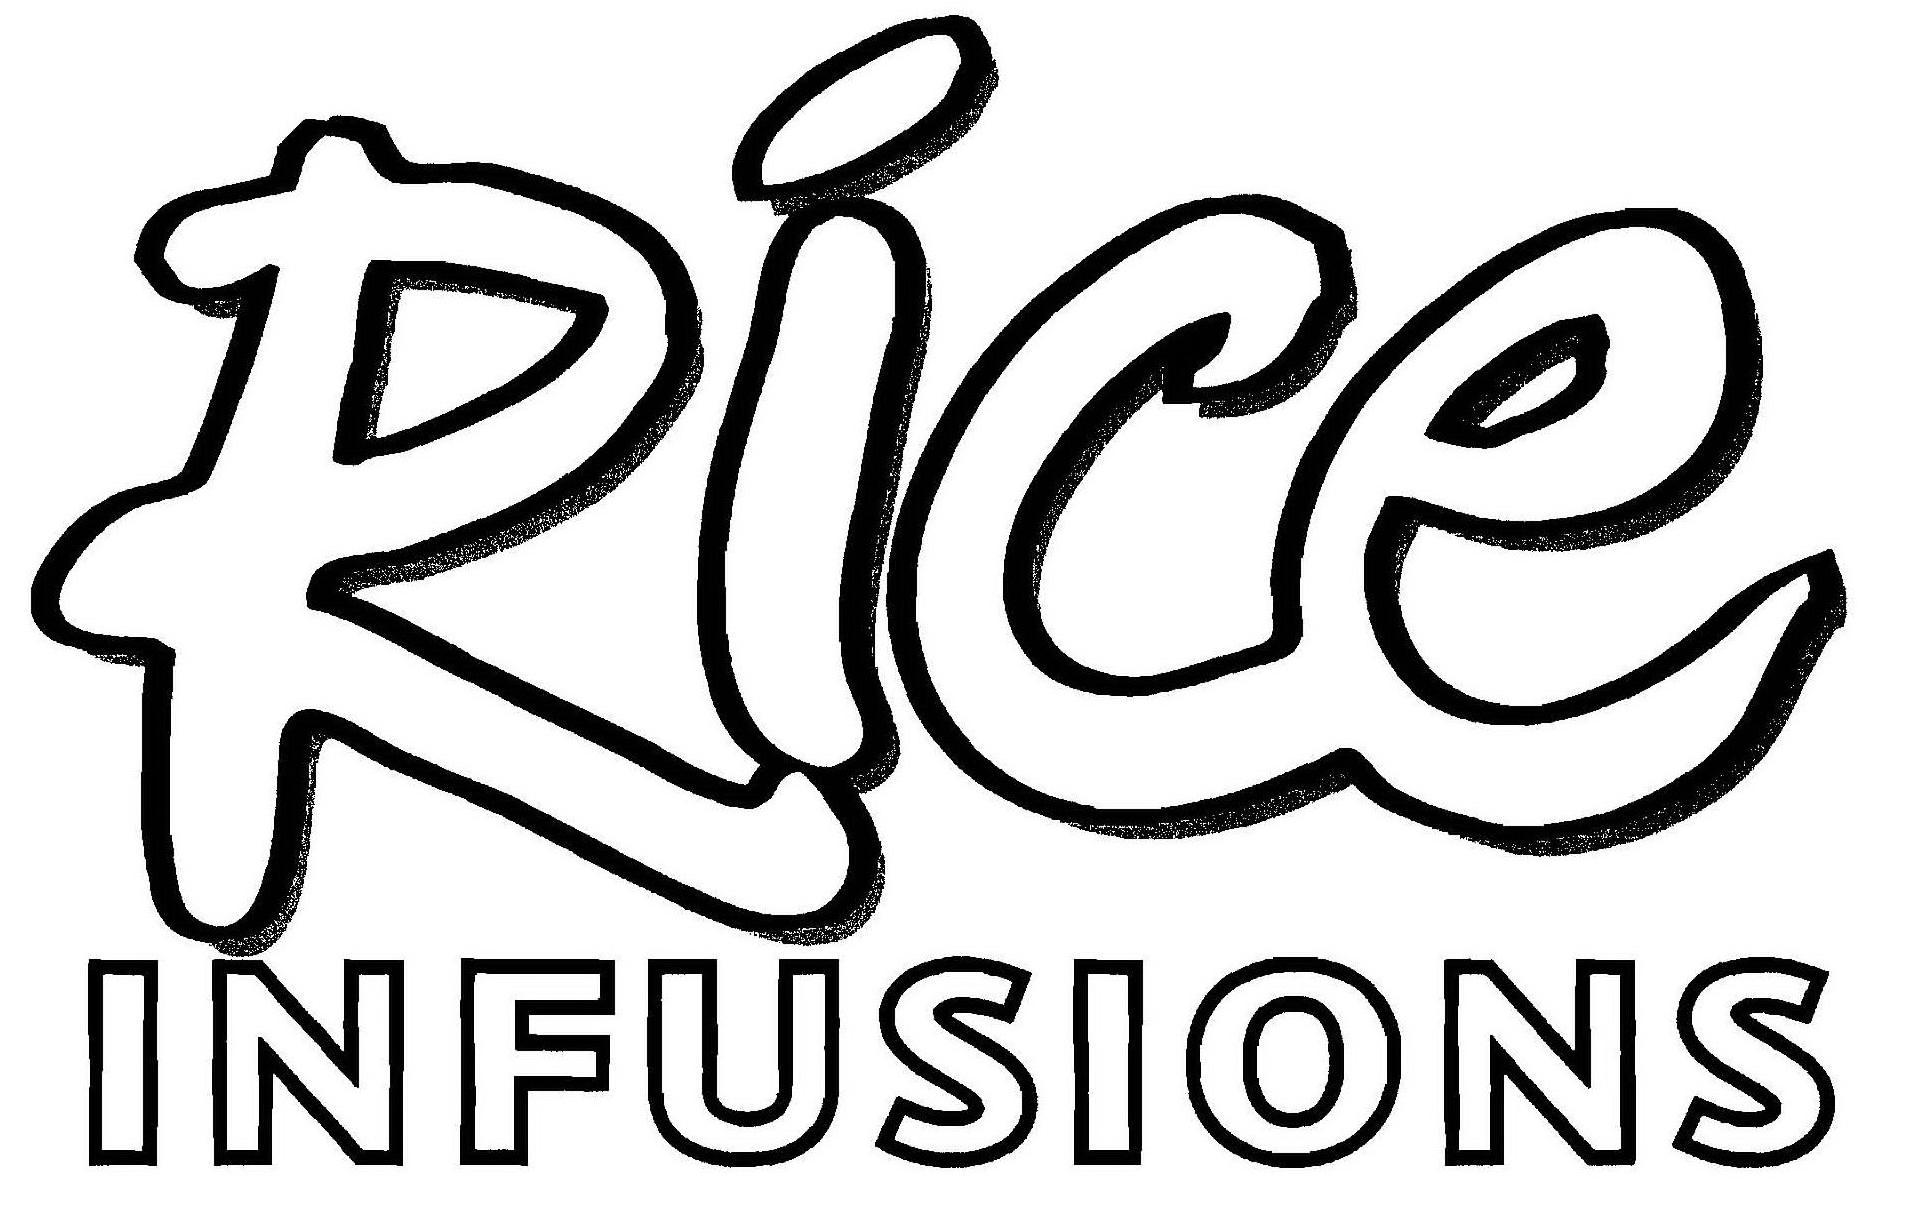  RICE INFUSIONS